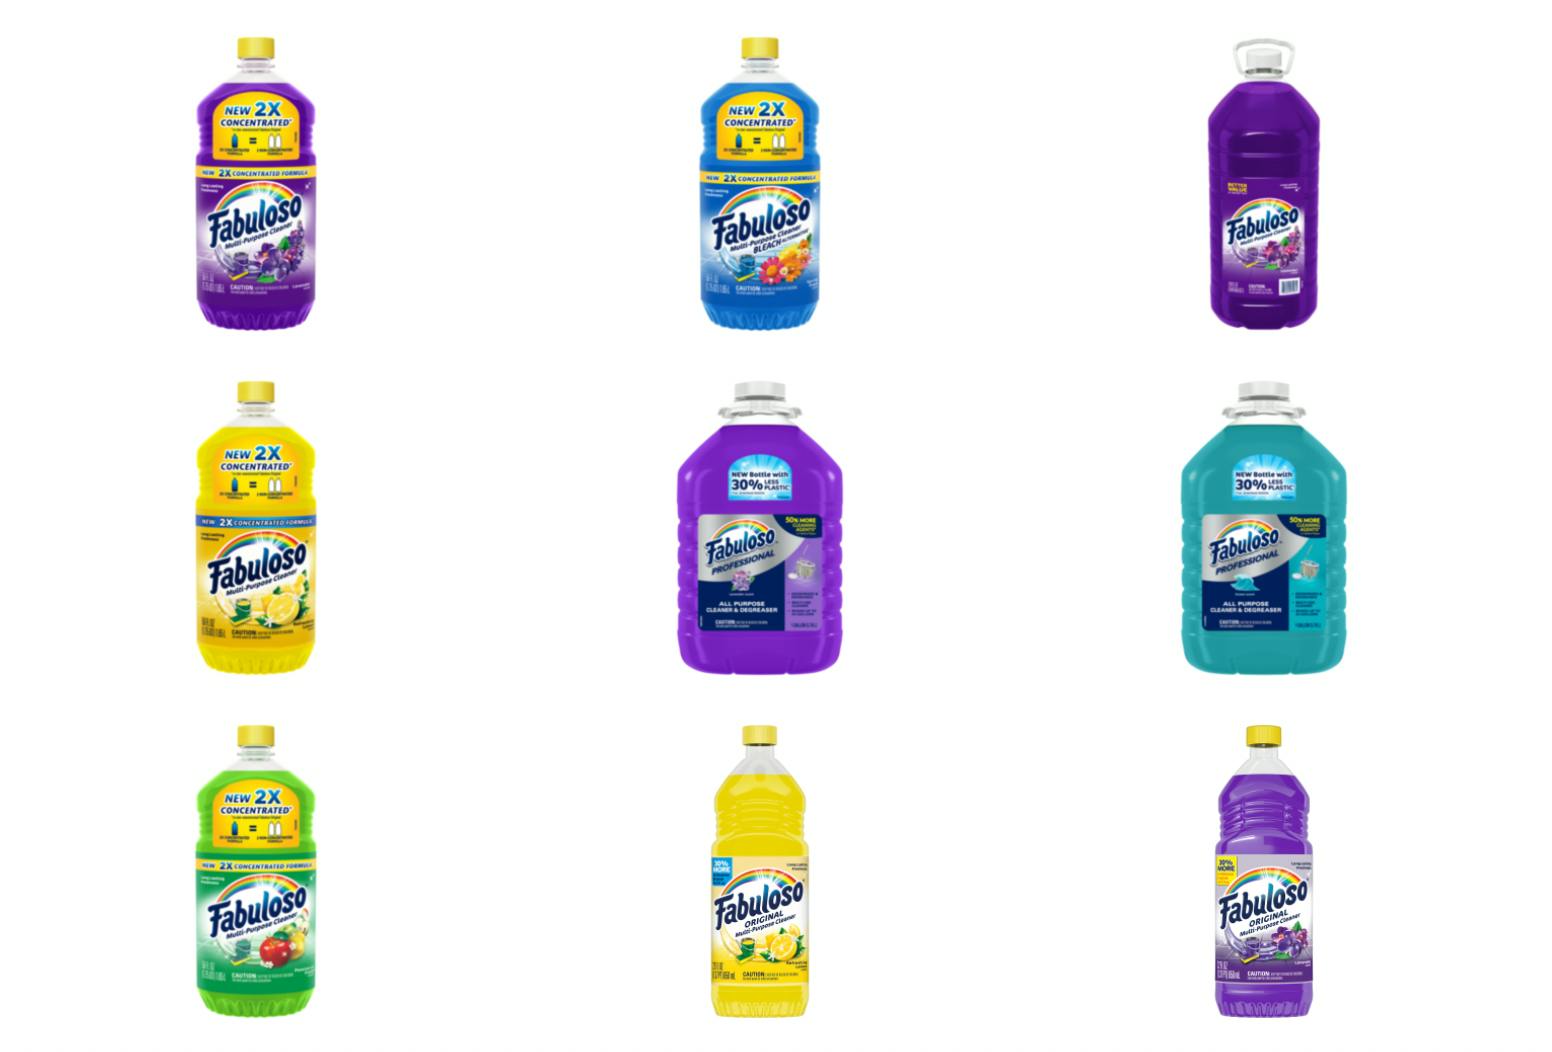 The Fabuloso products affected by the February 2023 recall.